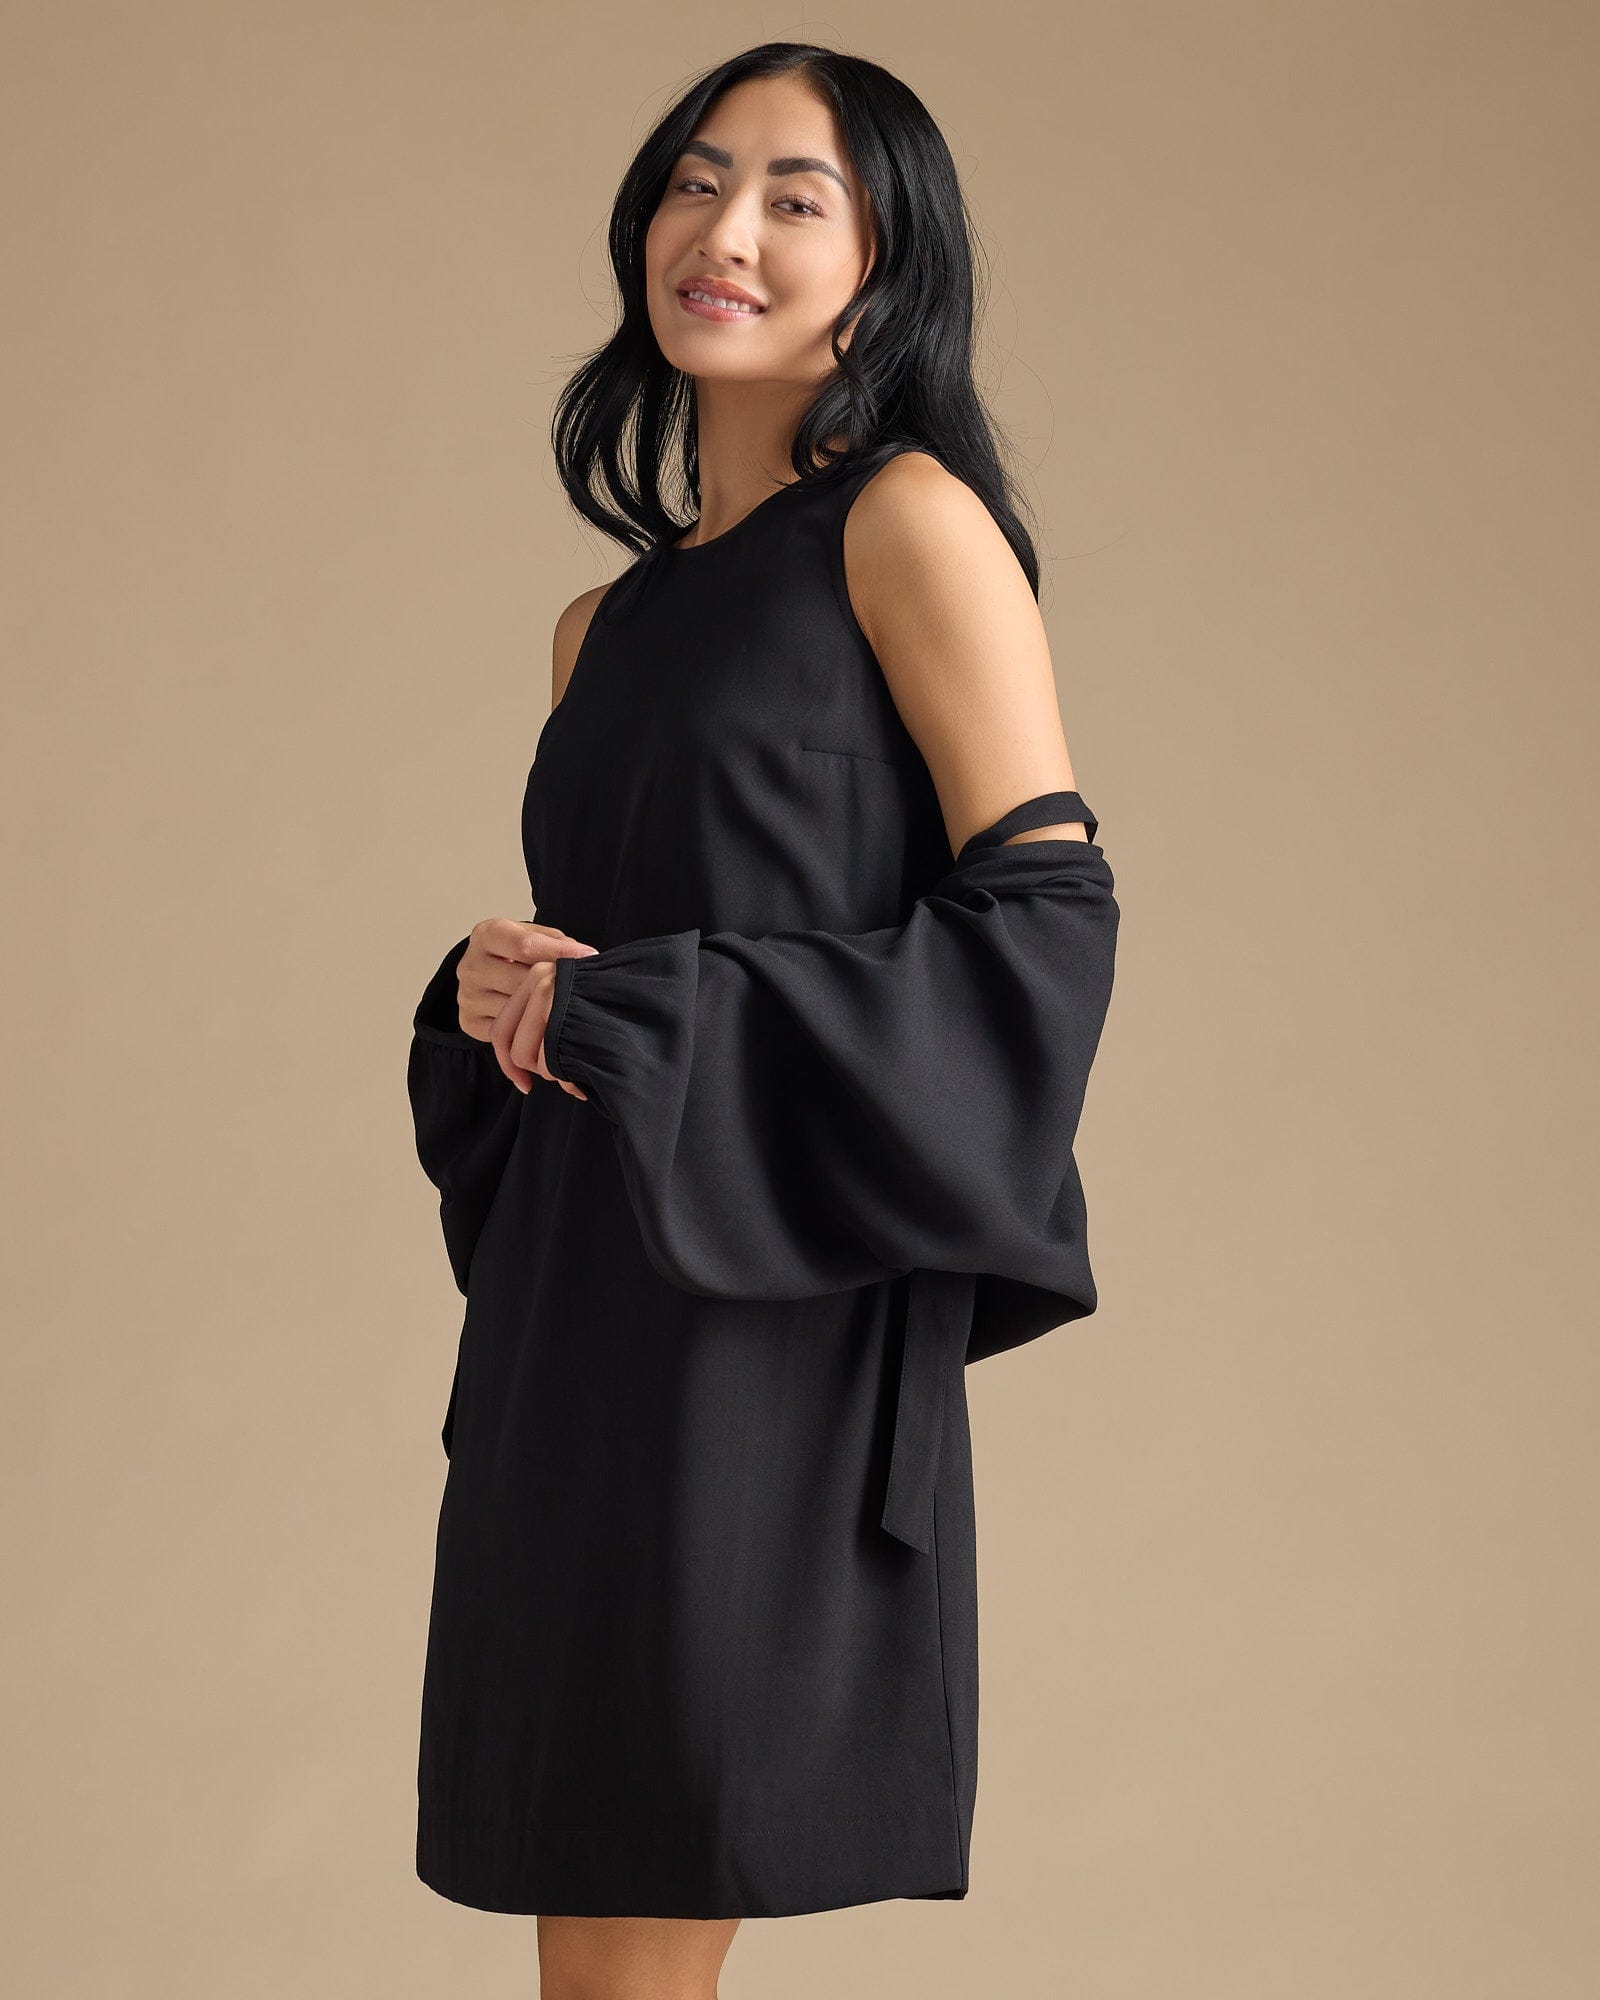 Woman in a black dress with removable sleeves